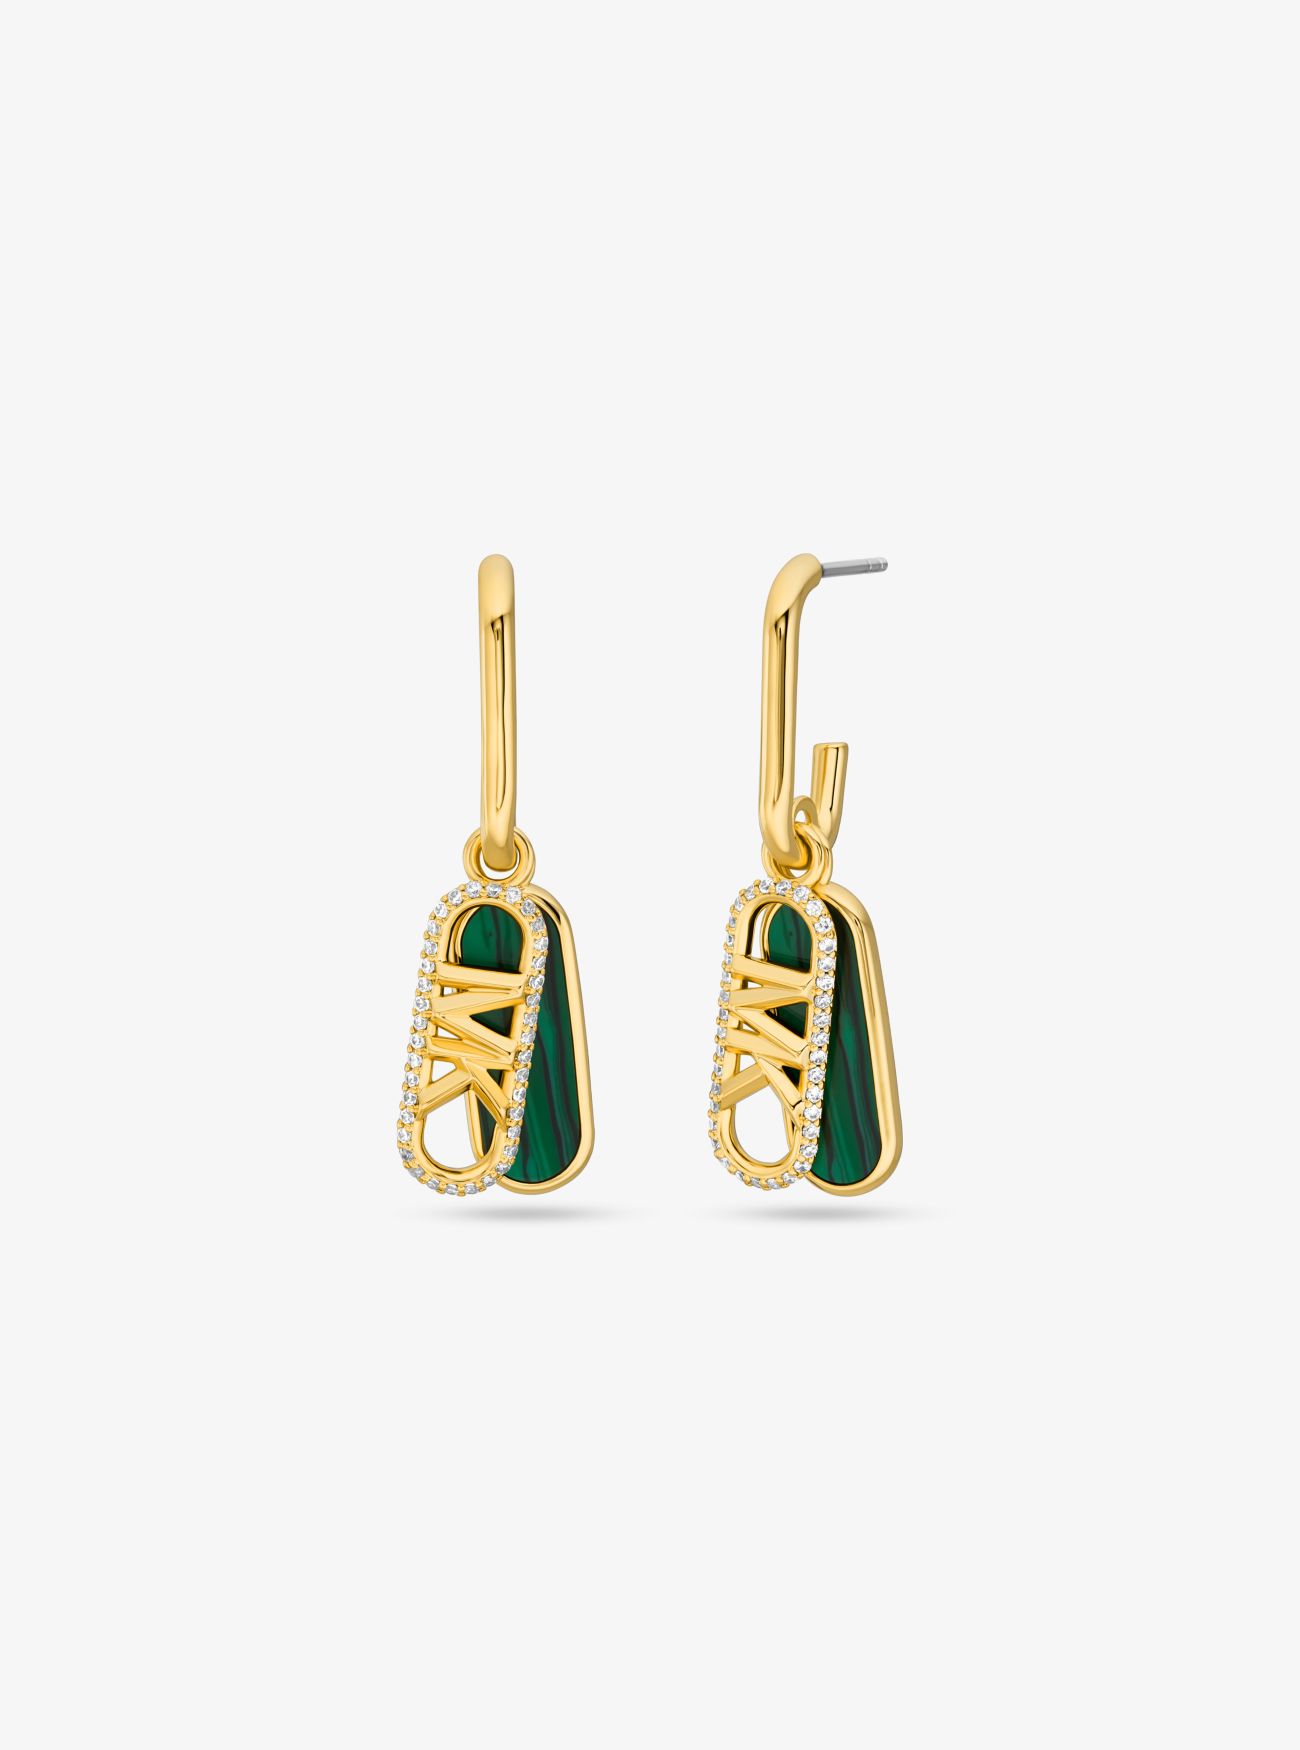 MK Precious Metal-Plated Brass and Acetate PavÃ© Empire Link Earrings - Gold - Michael Kors